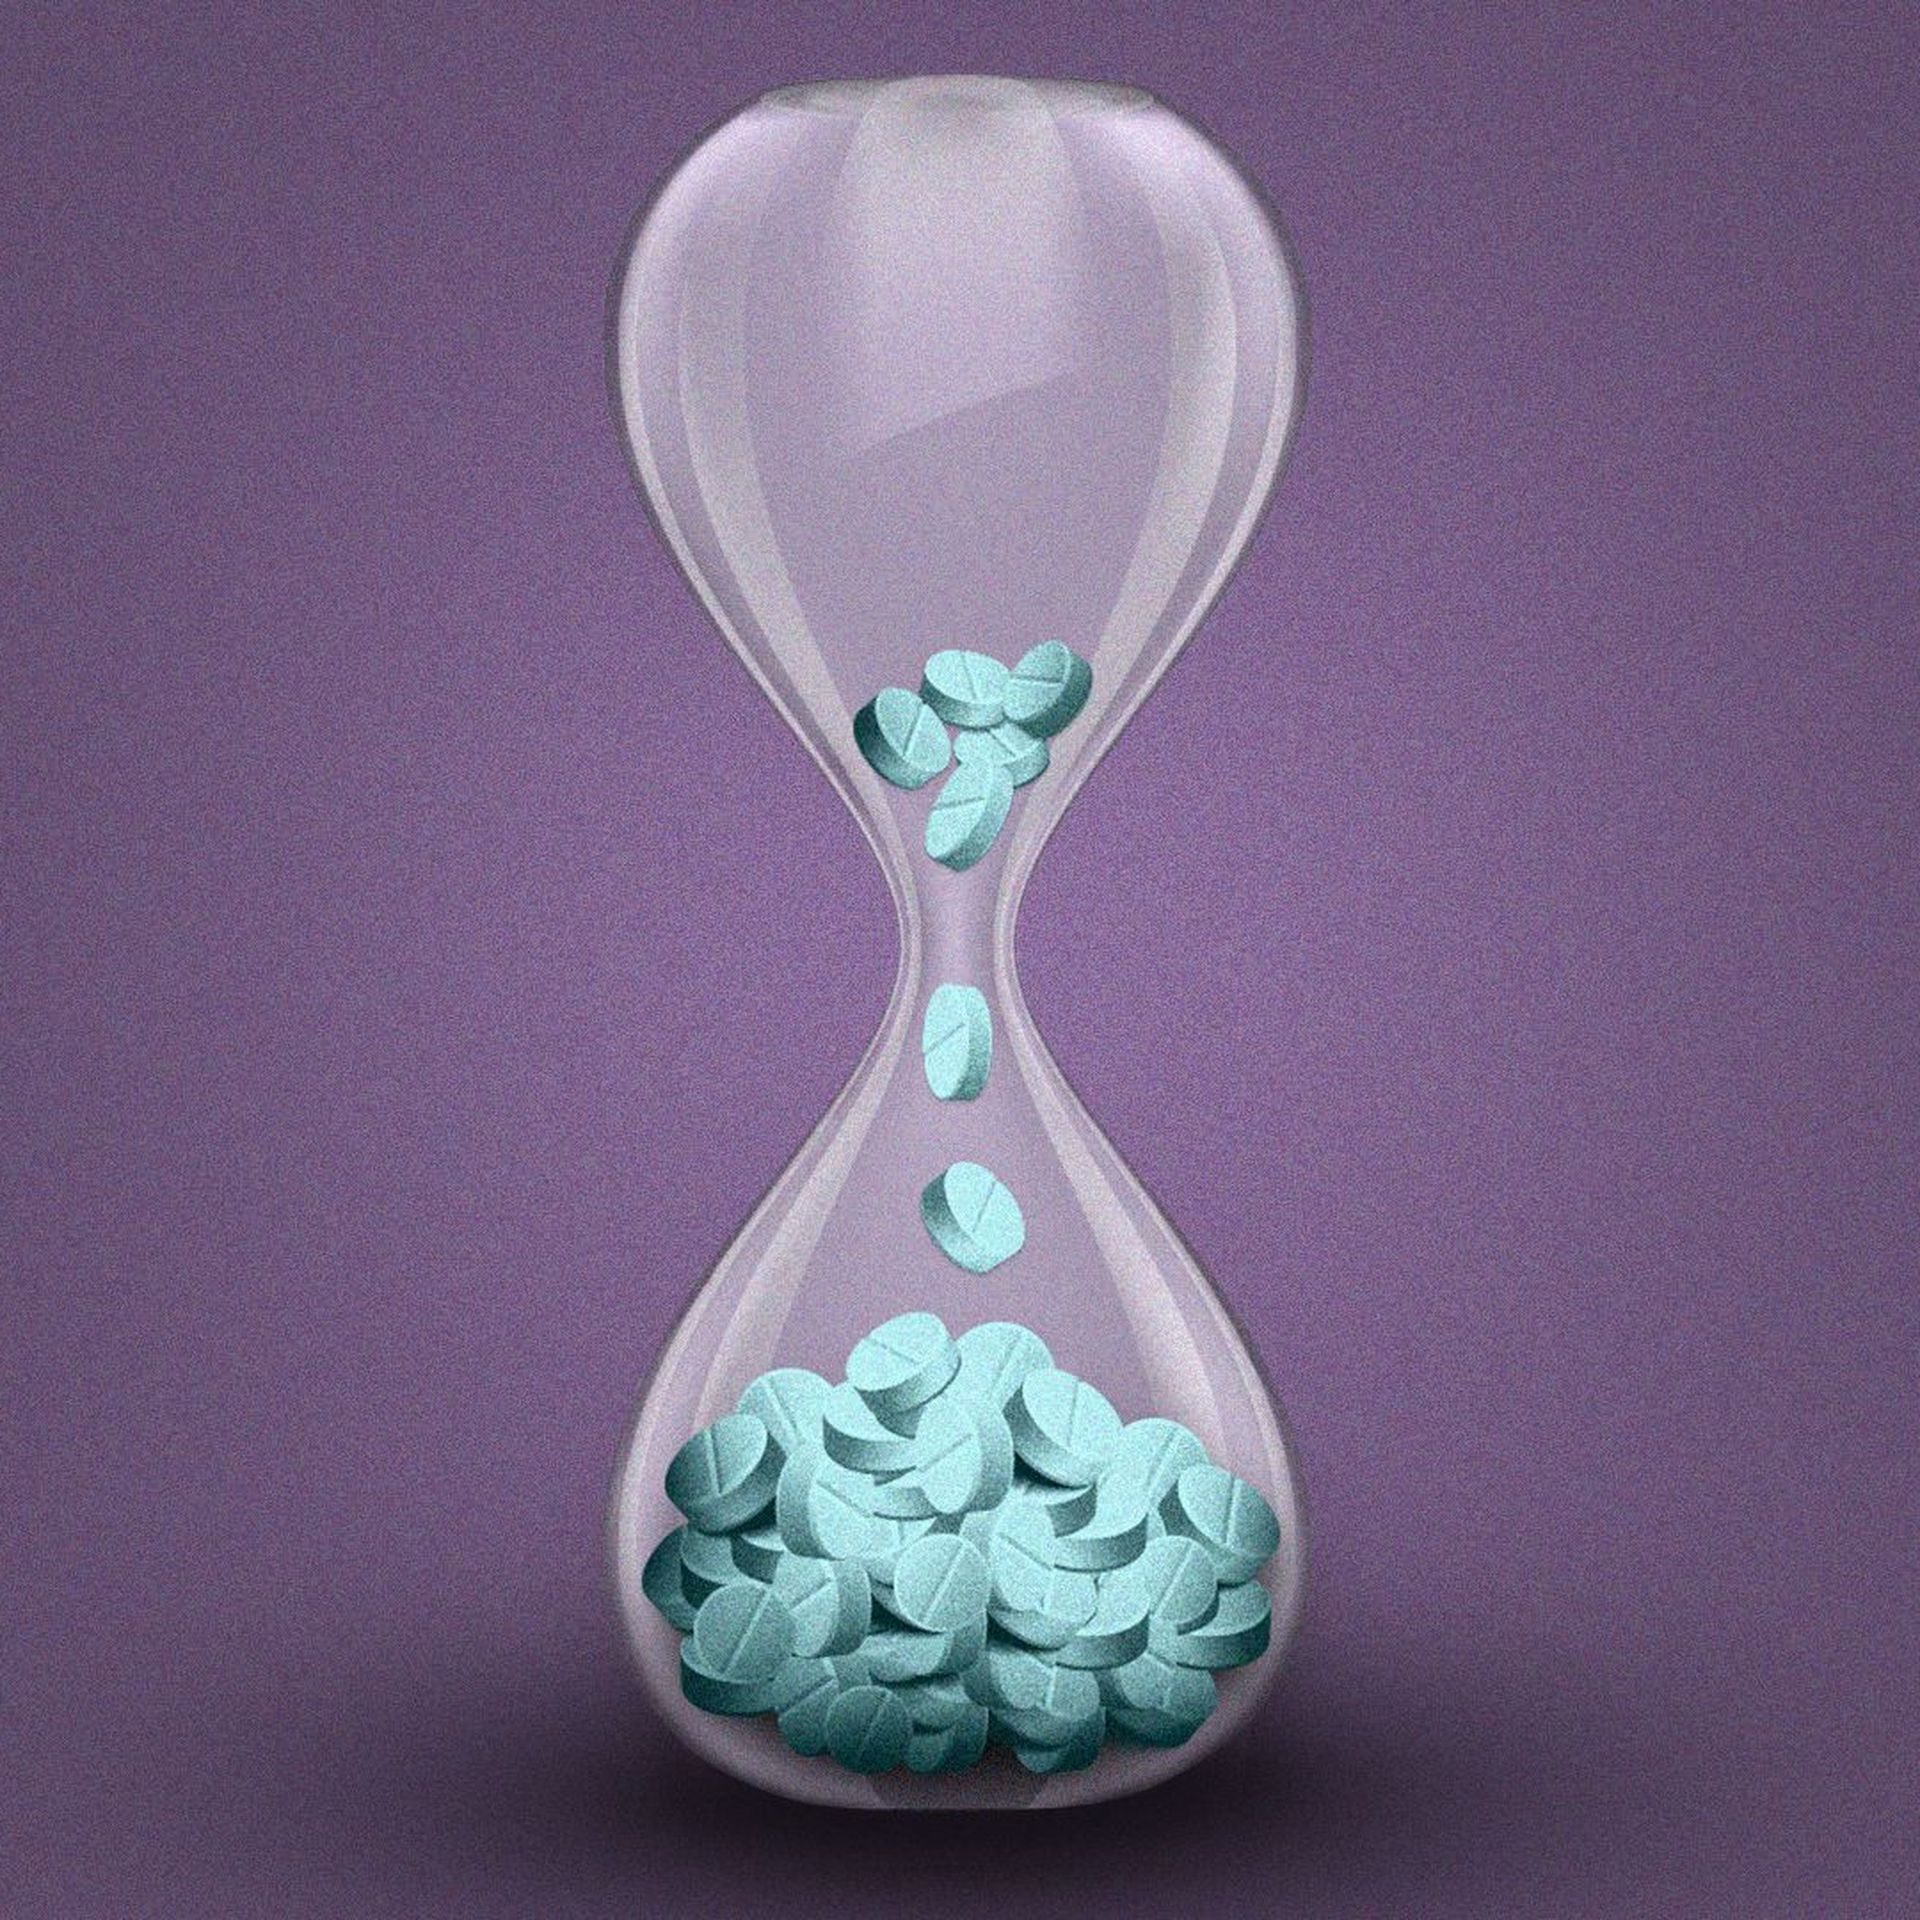 Illustration of an hourglass full of pills that have almost run out.